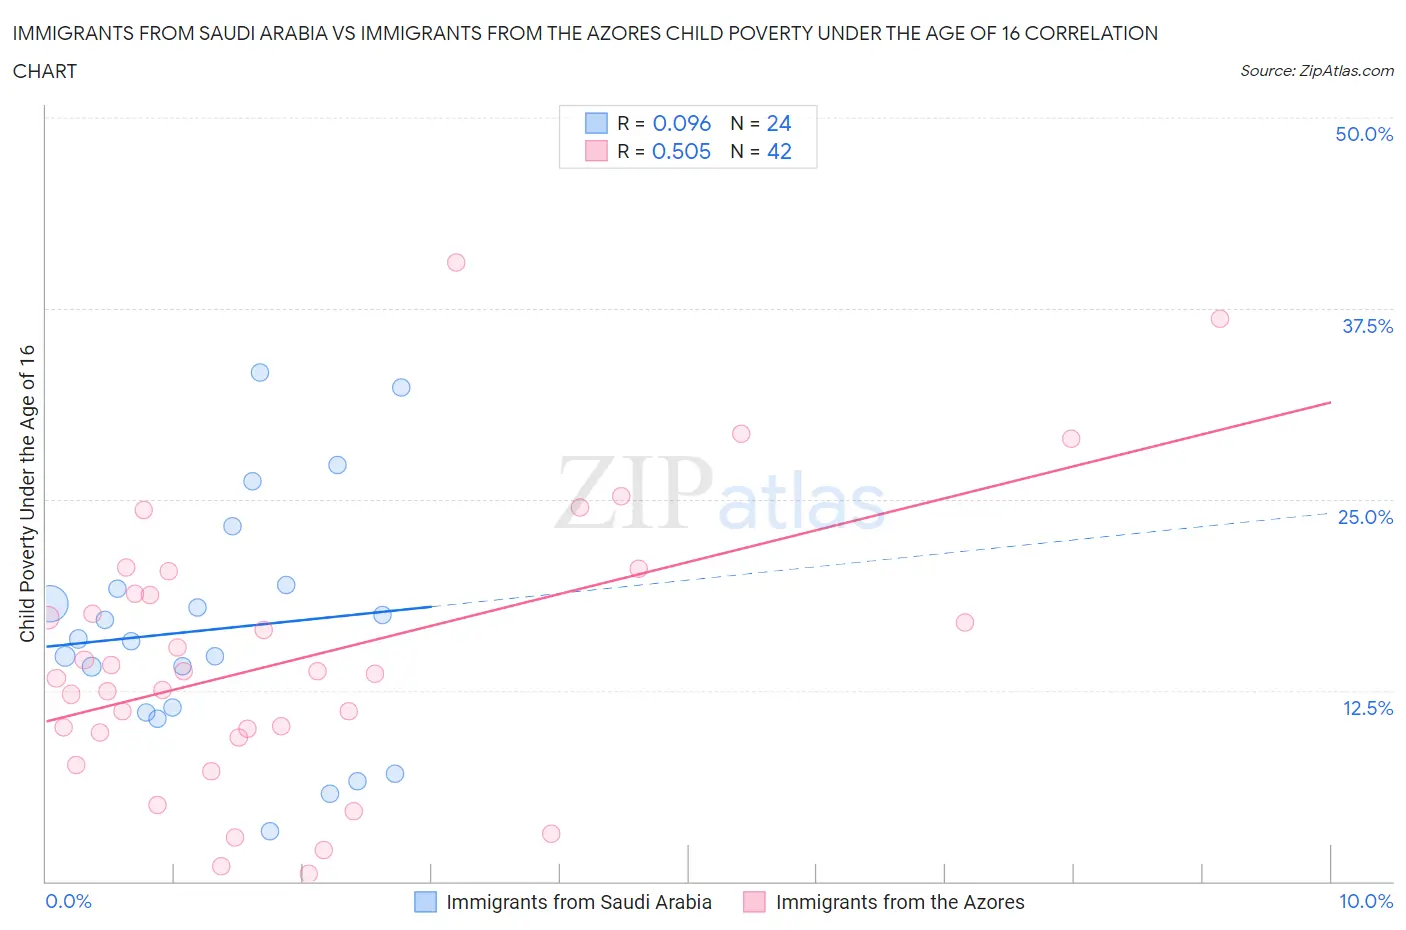 Immigrants from Saudi Arabia vs Immigrants from the Azores Child Poverty Under the Age of 16